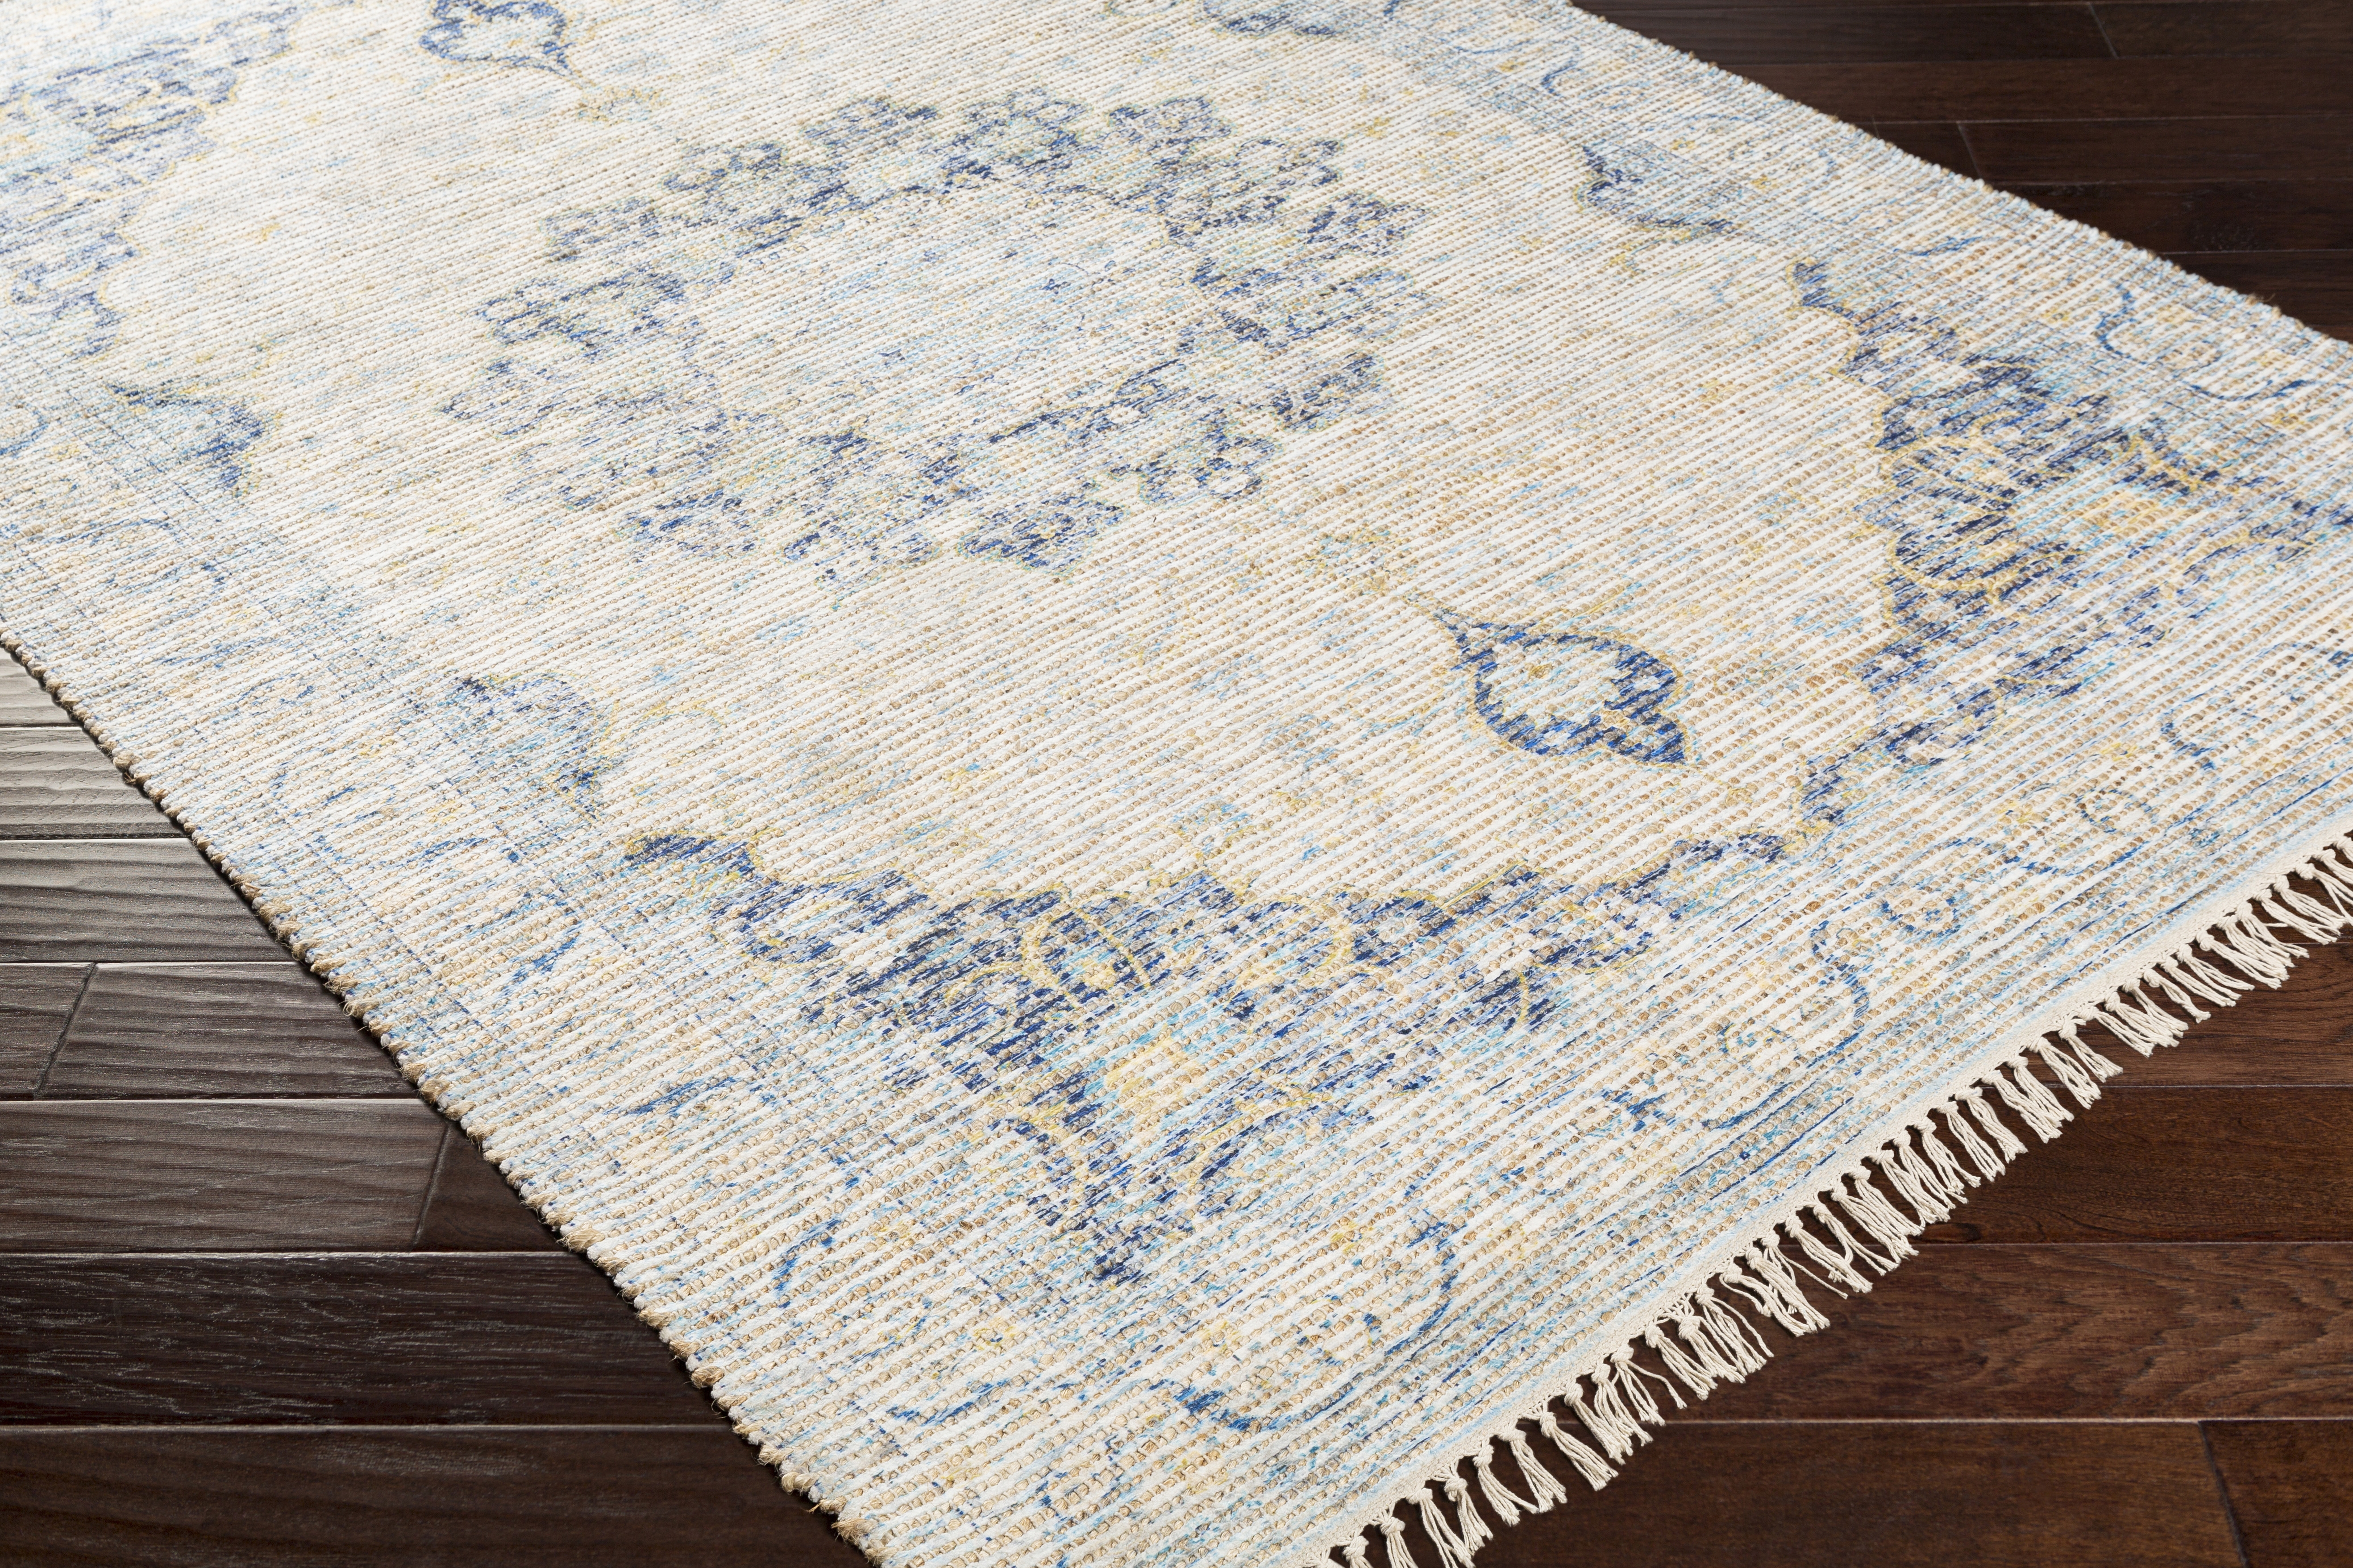 Coventry Rug, 2'6" x 8' - Image 3